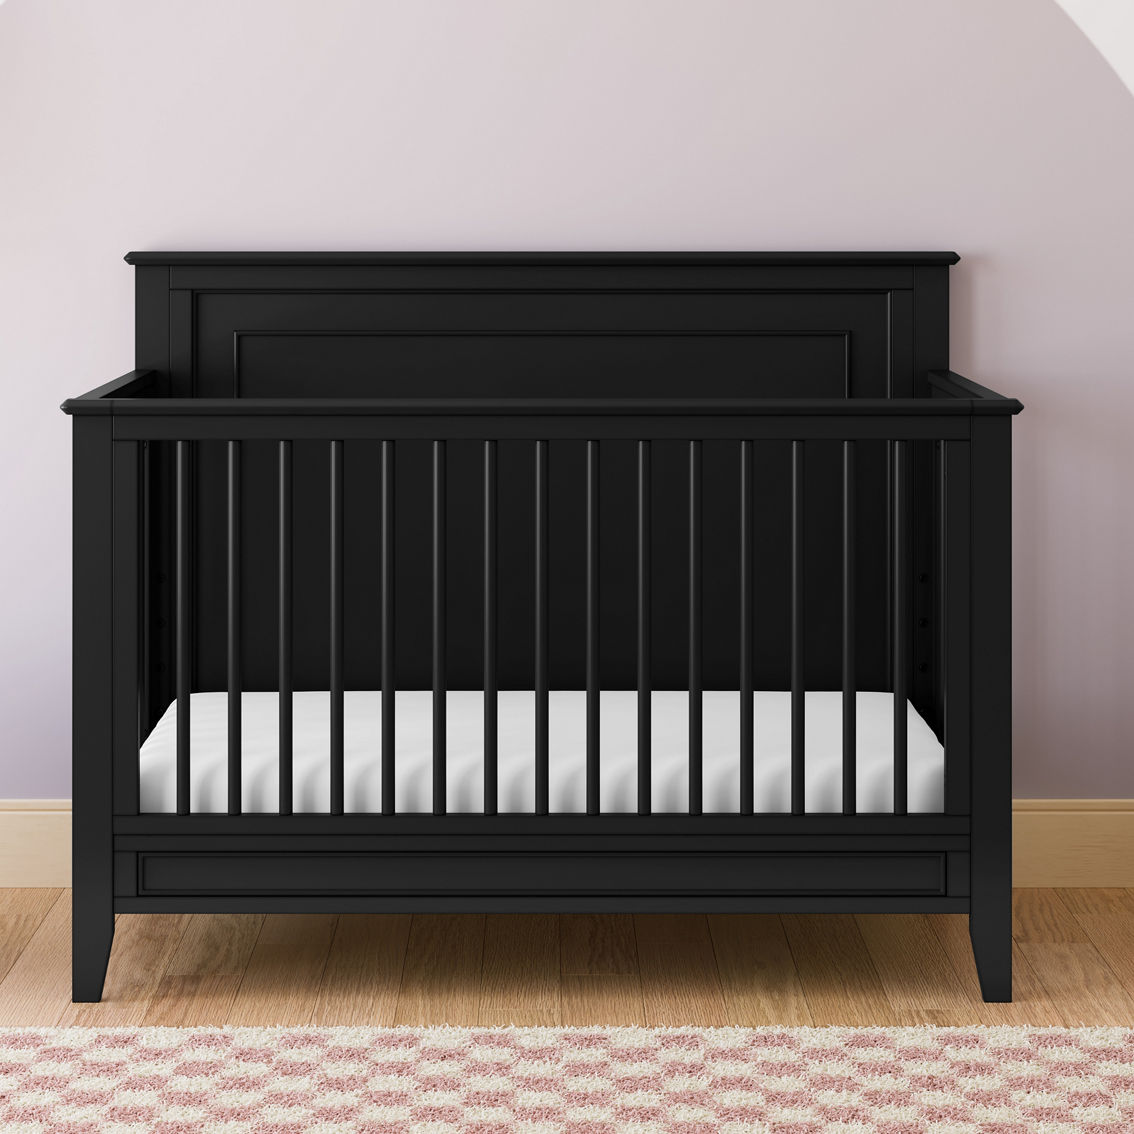 Storkcraft Solstice 5-in-1 Convertible Crib - Image 8 of 8